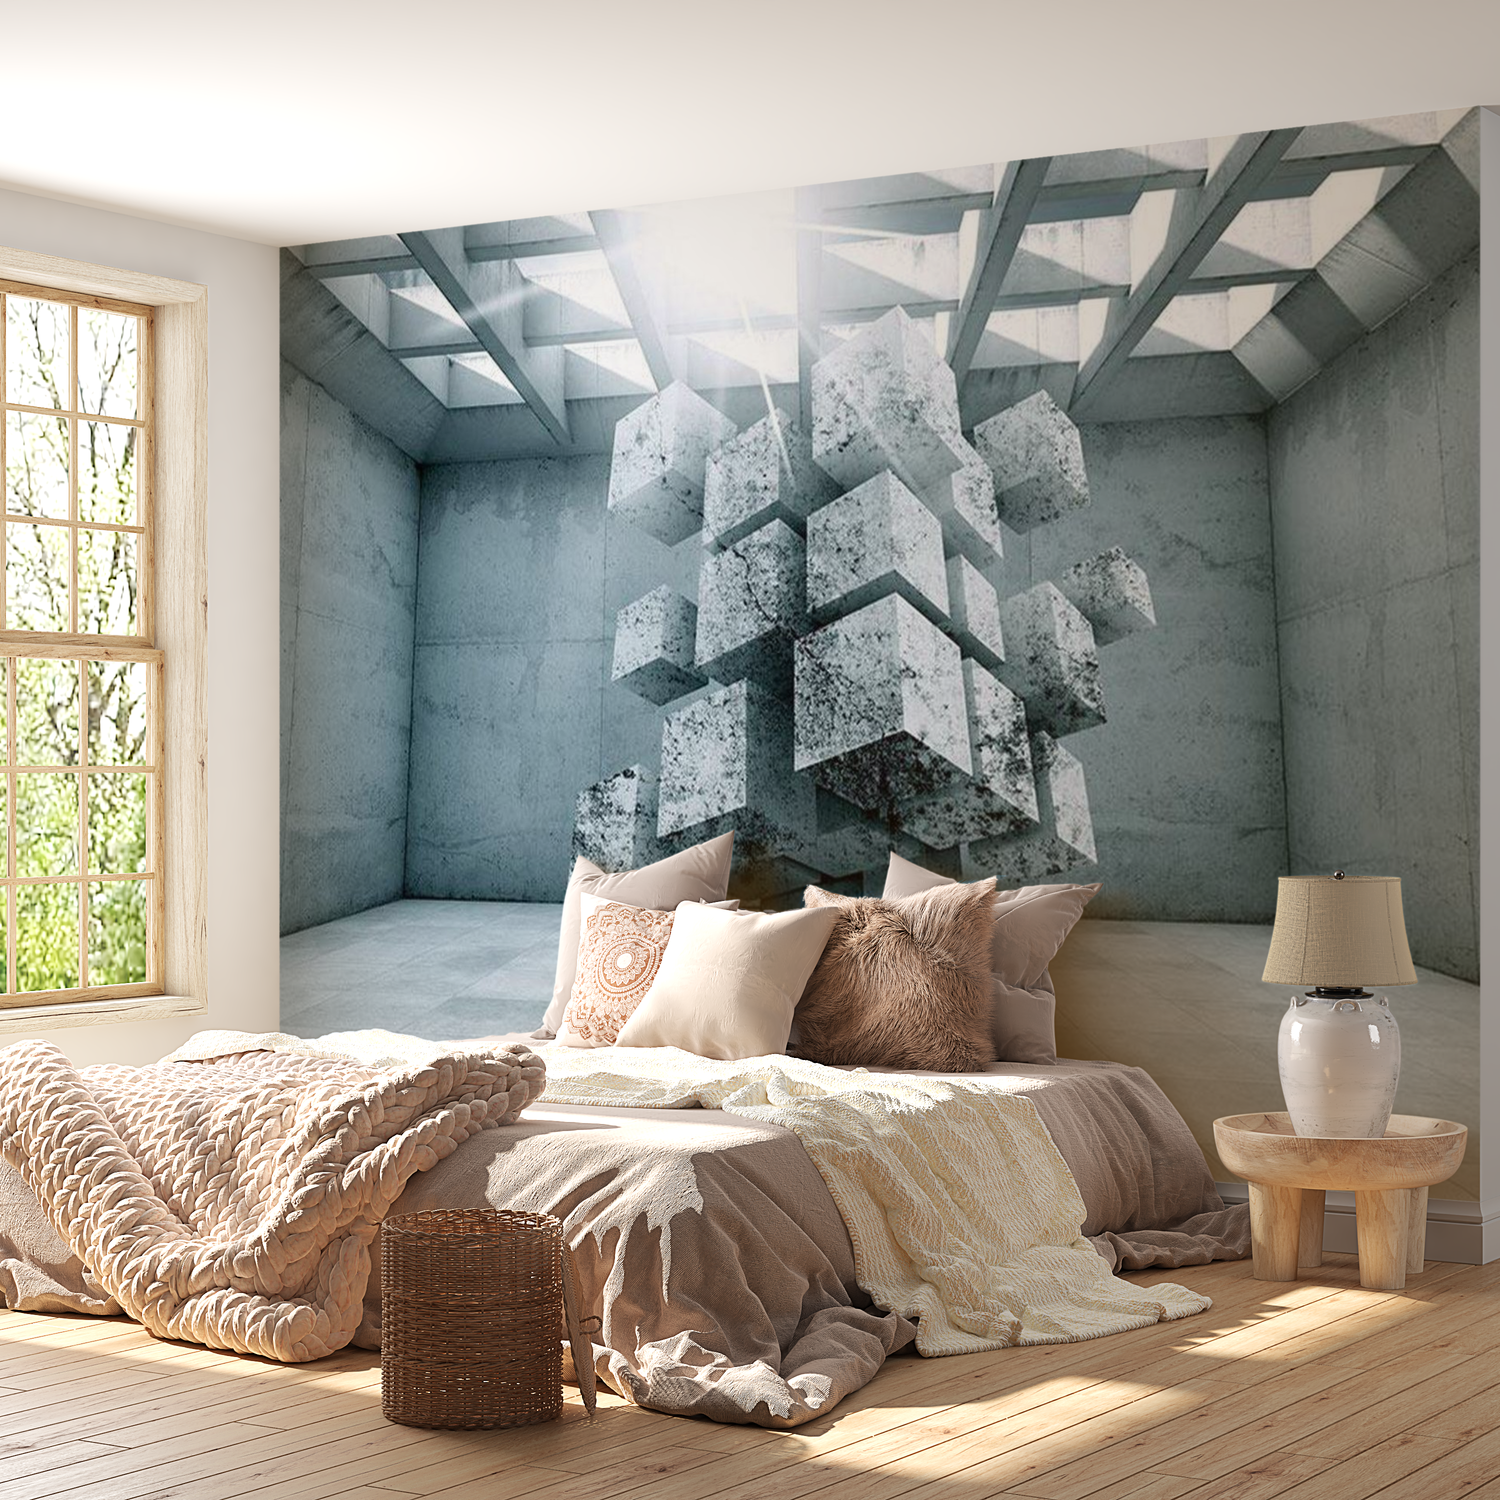 3D Illusion Wallpaper Wall Mural - Trapped In Space 39"Wx27"H